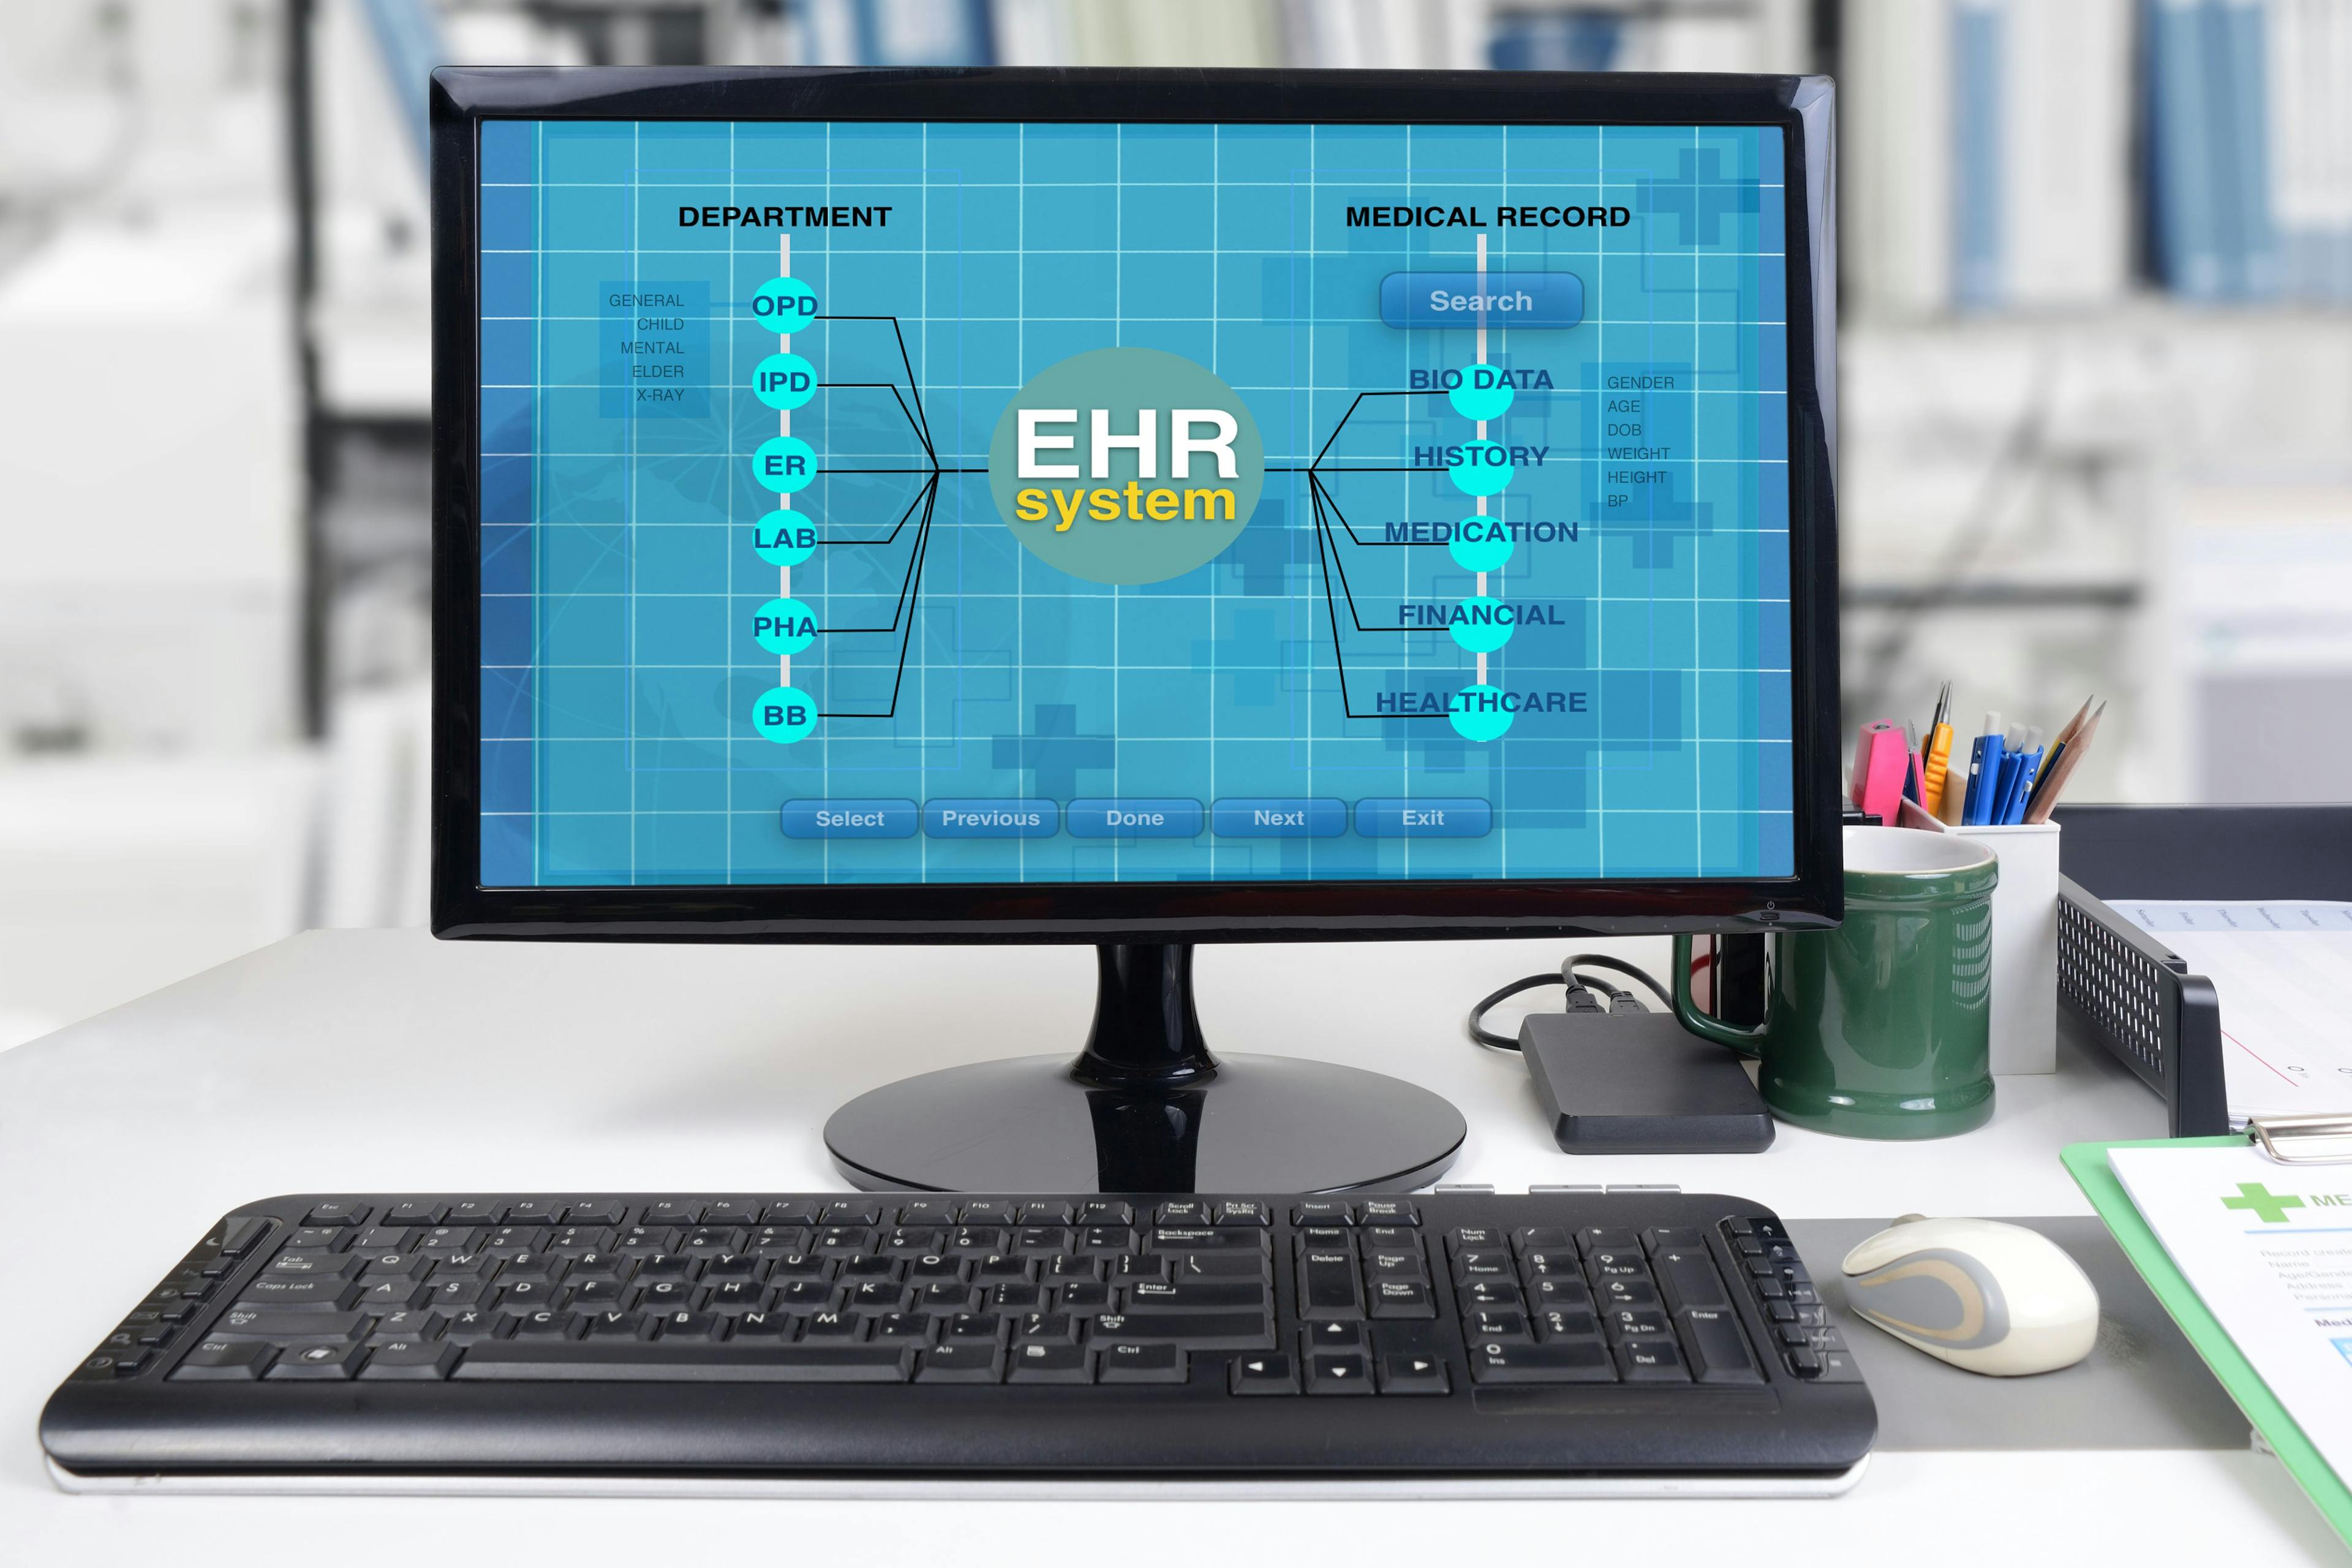 Physicians spend 4.5 hours a day on electronic health records